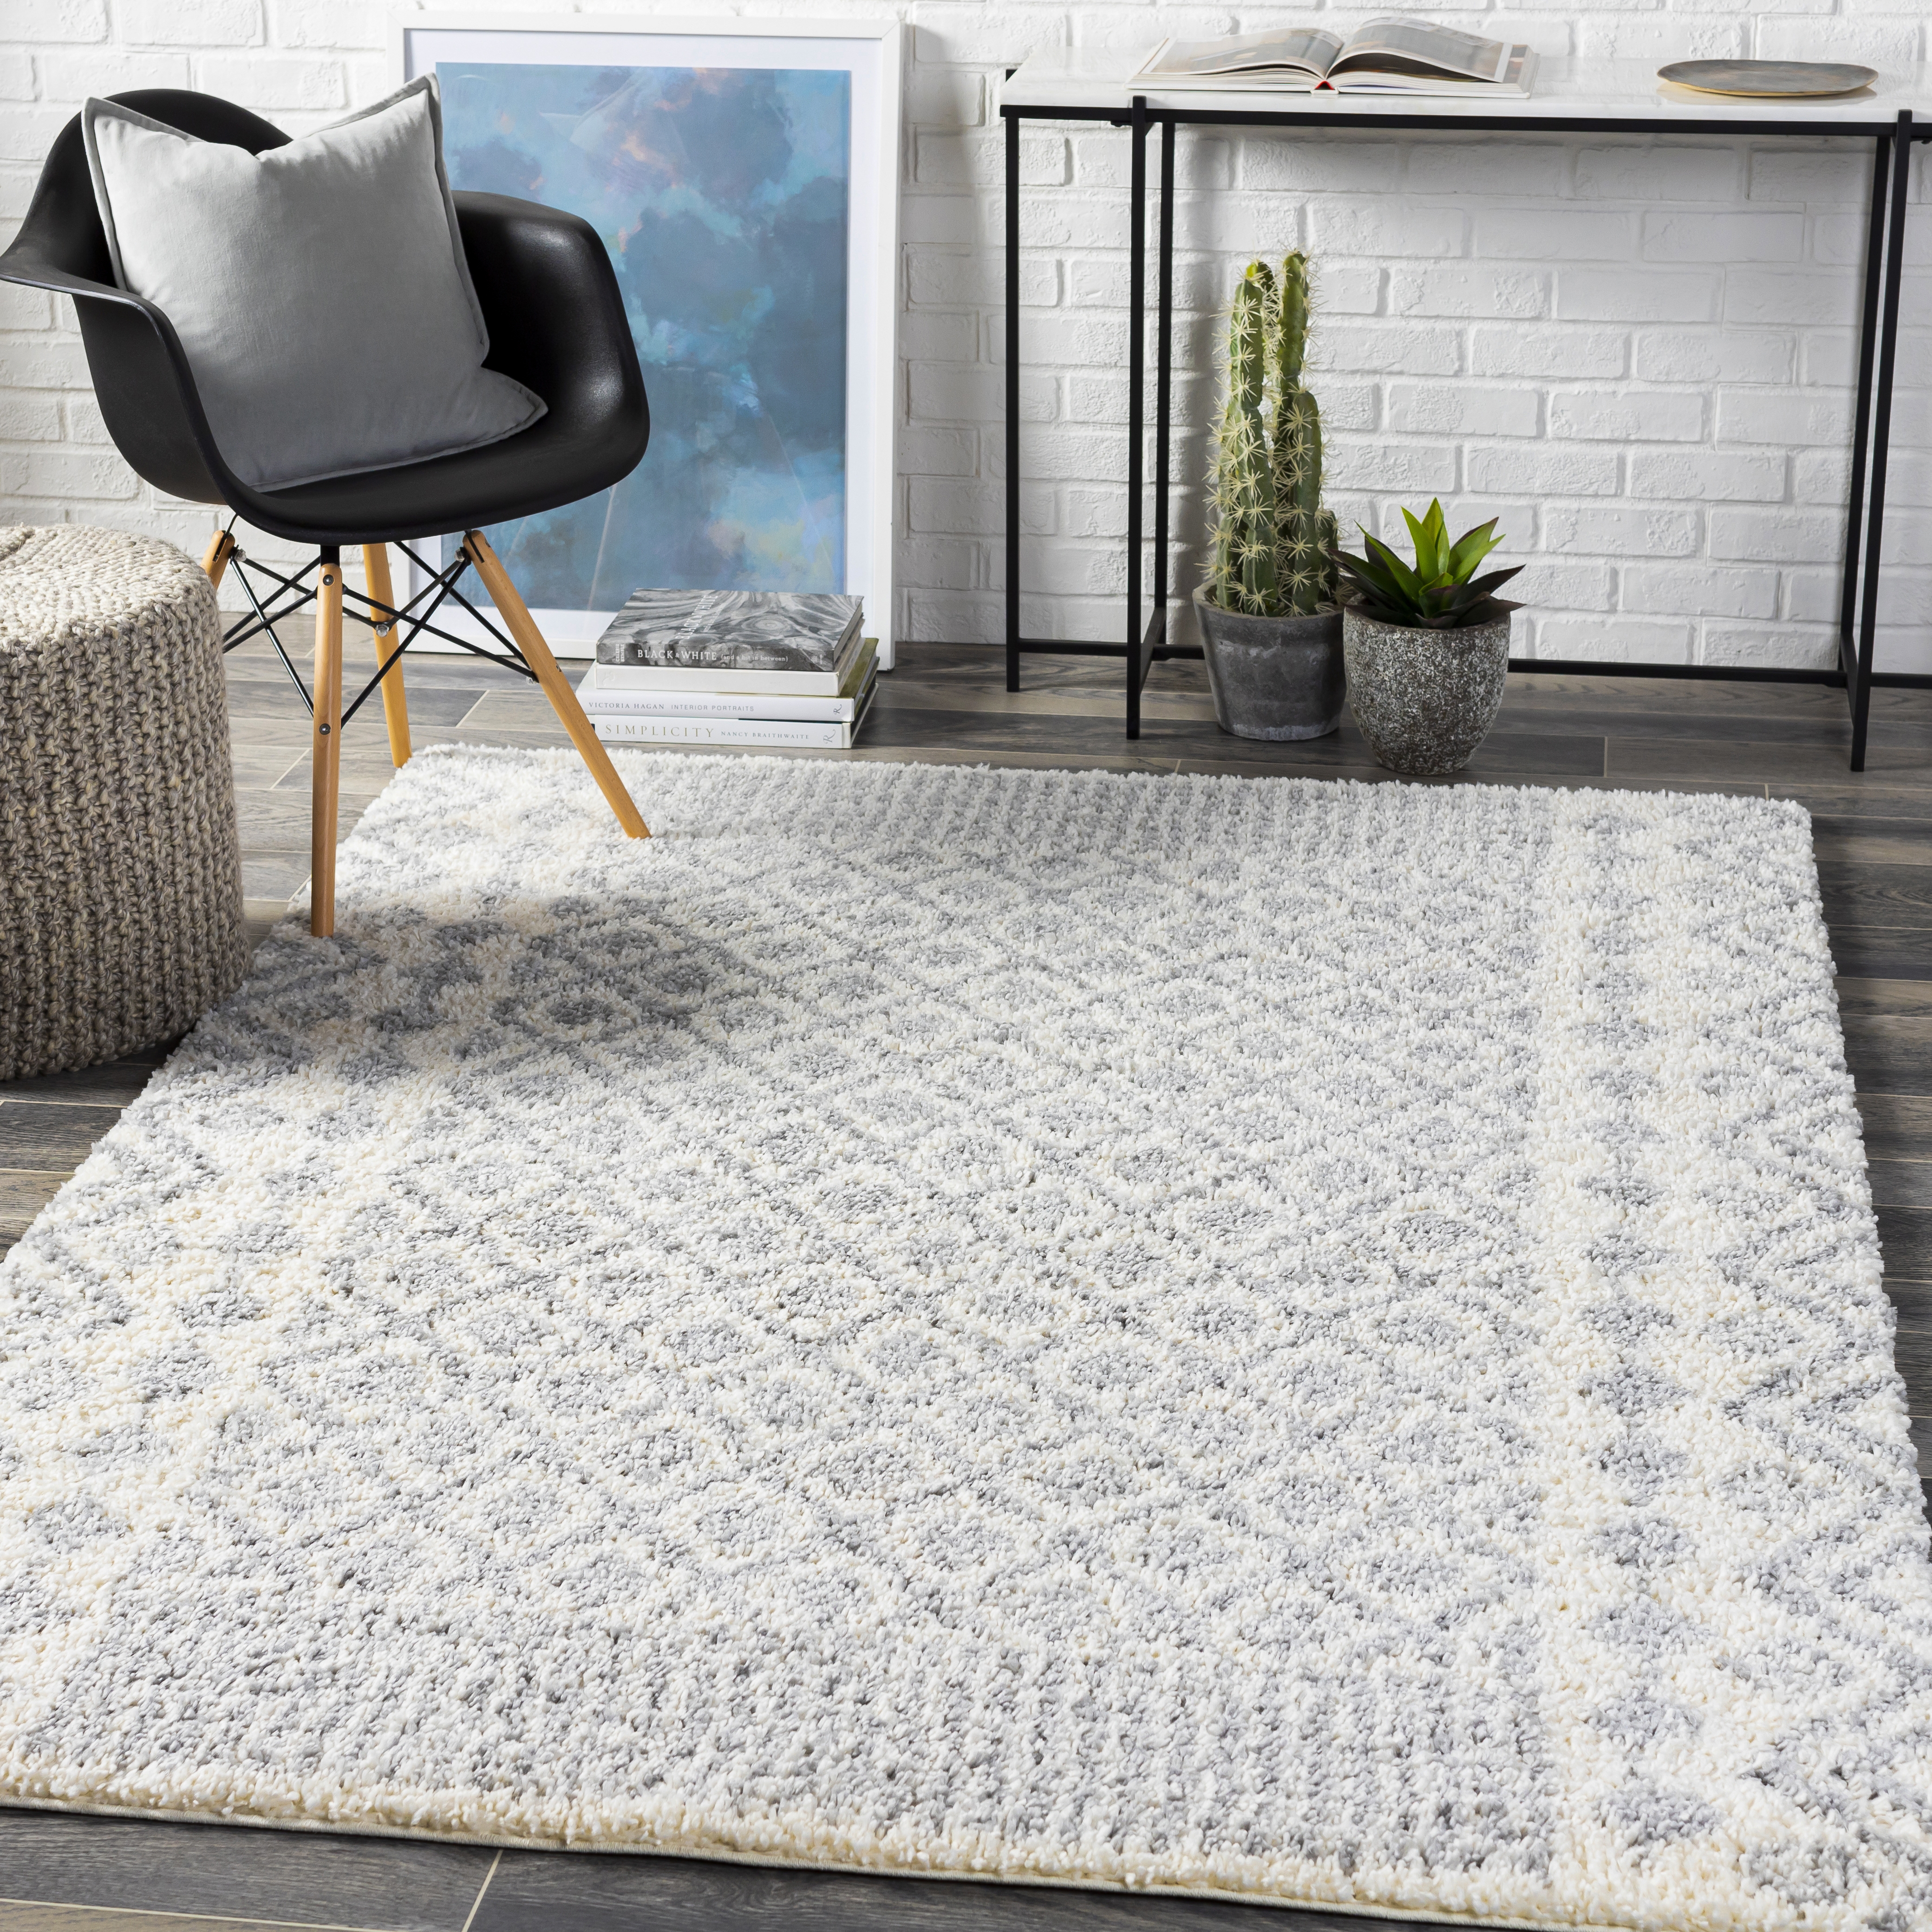 Deluxe Shag Rug, 5'3" x 7'3" - Image 1